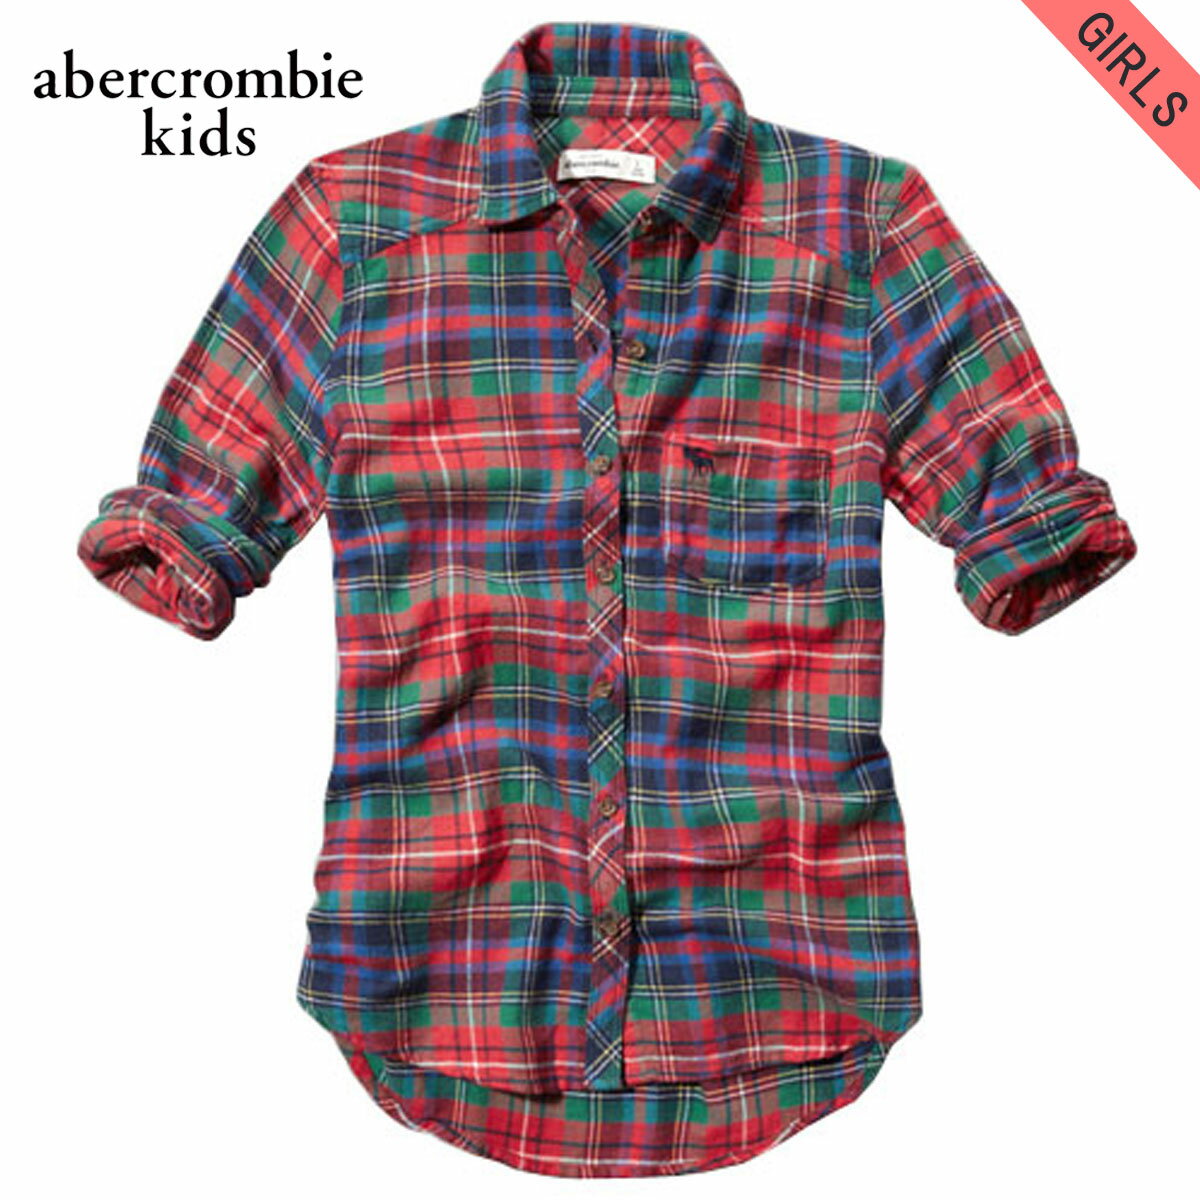 30%OFFセール  アバクロキッズ シャツ ガールズ 子供服 正規品 AbercrombieKids 長袖シャツ supersoft flannel shirt 240-780-0625-050 D20S30